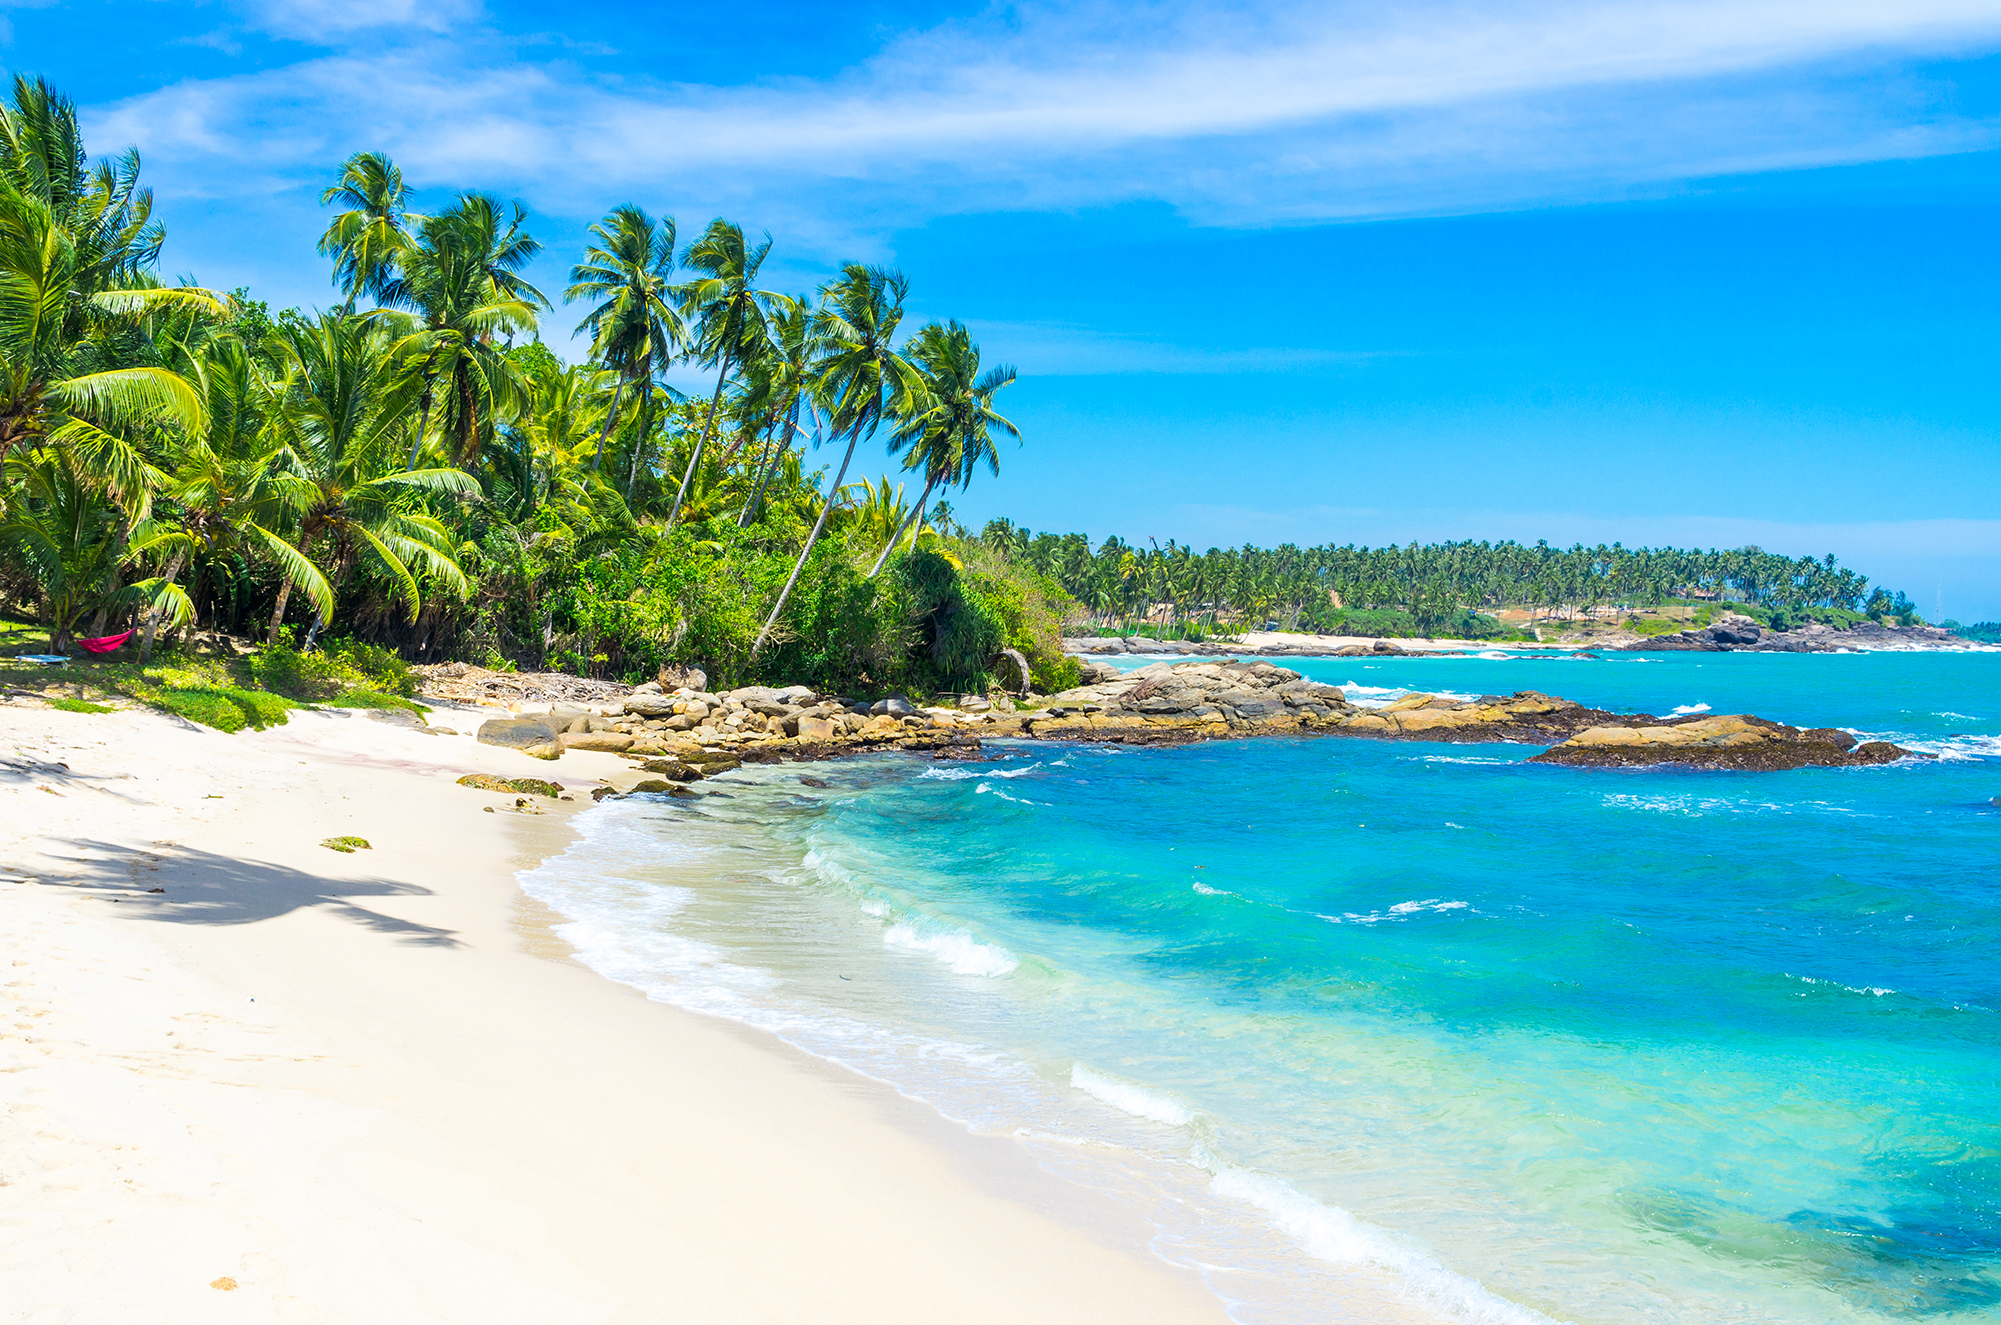 A beautiful white sandy beach with azure waters and palm trees in Sri Lanka, which is a popular scuba diving destination